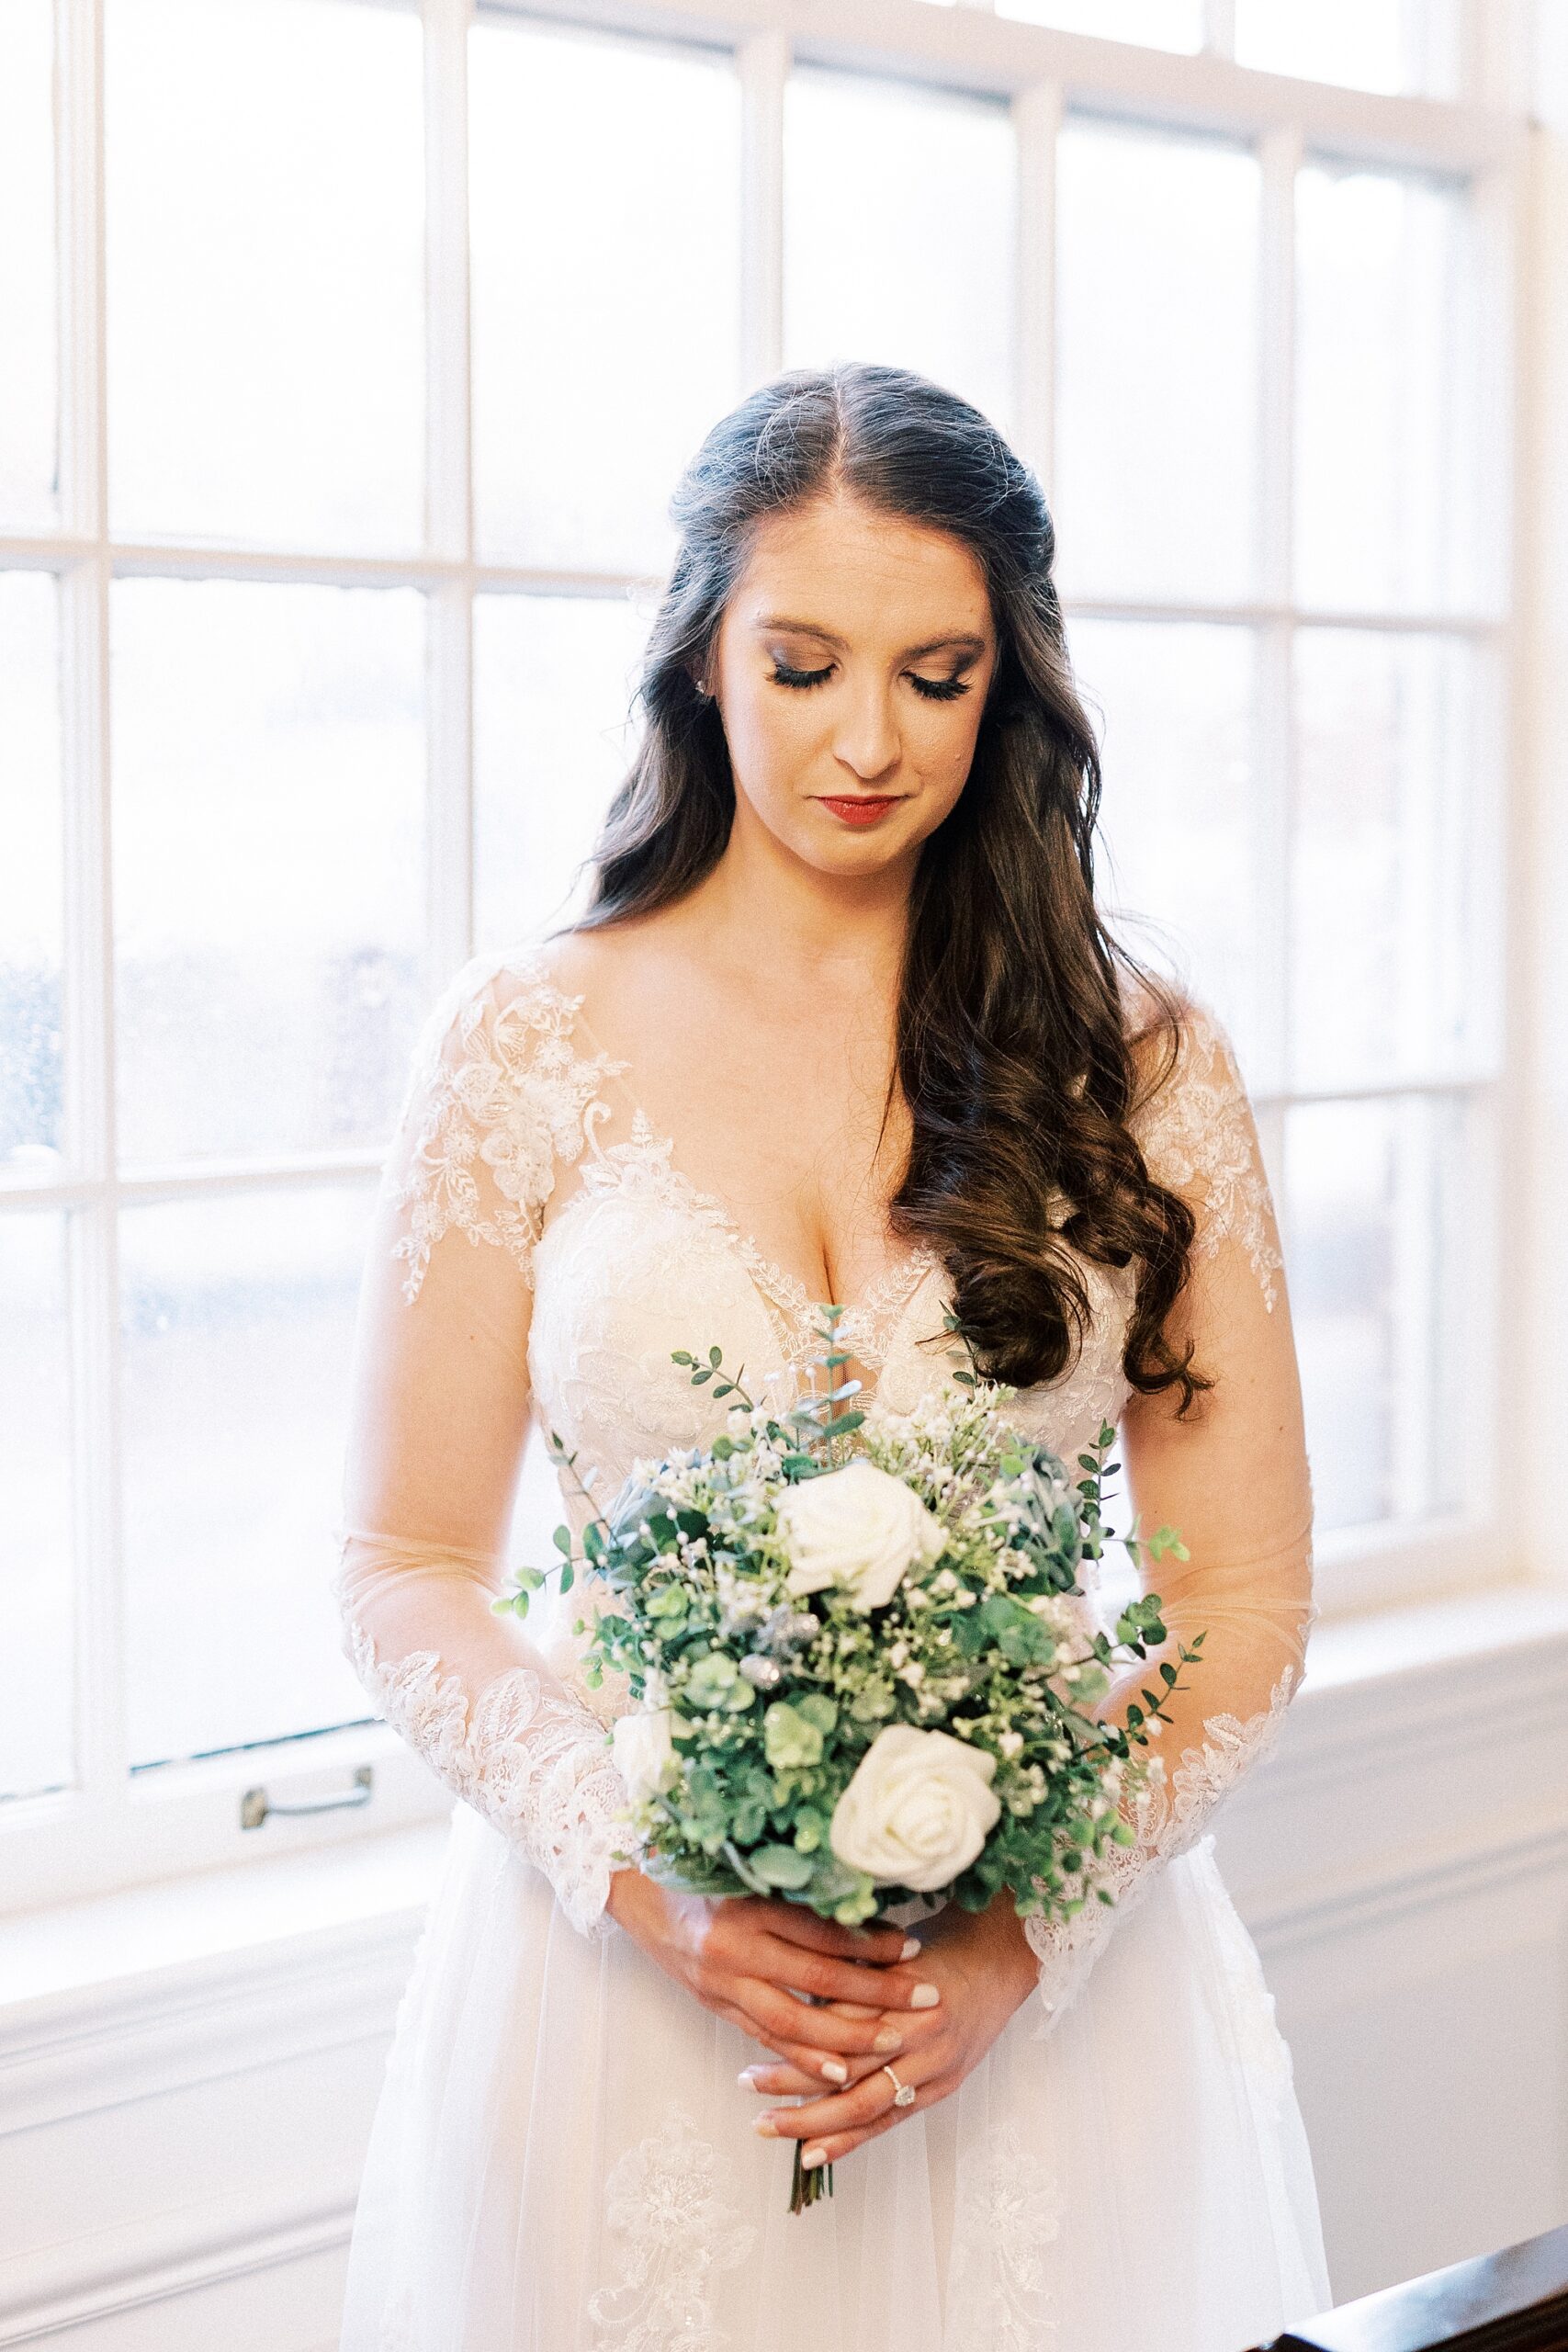 bride smiles down at bouquet of white roses and greenery in front of church window